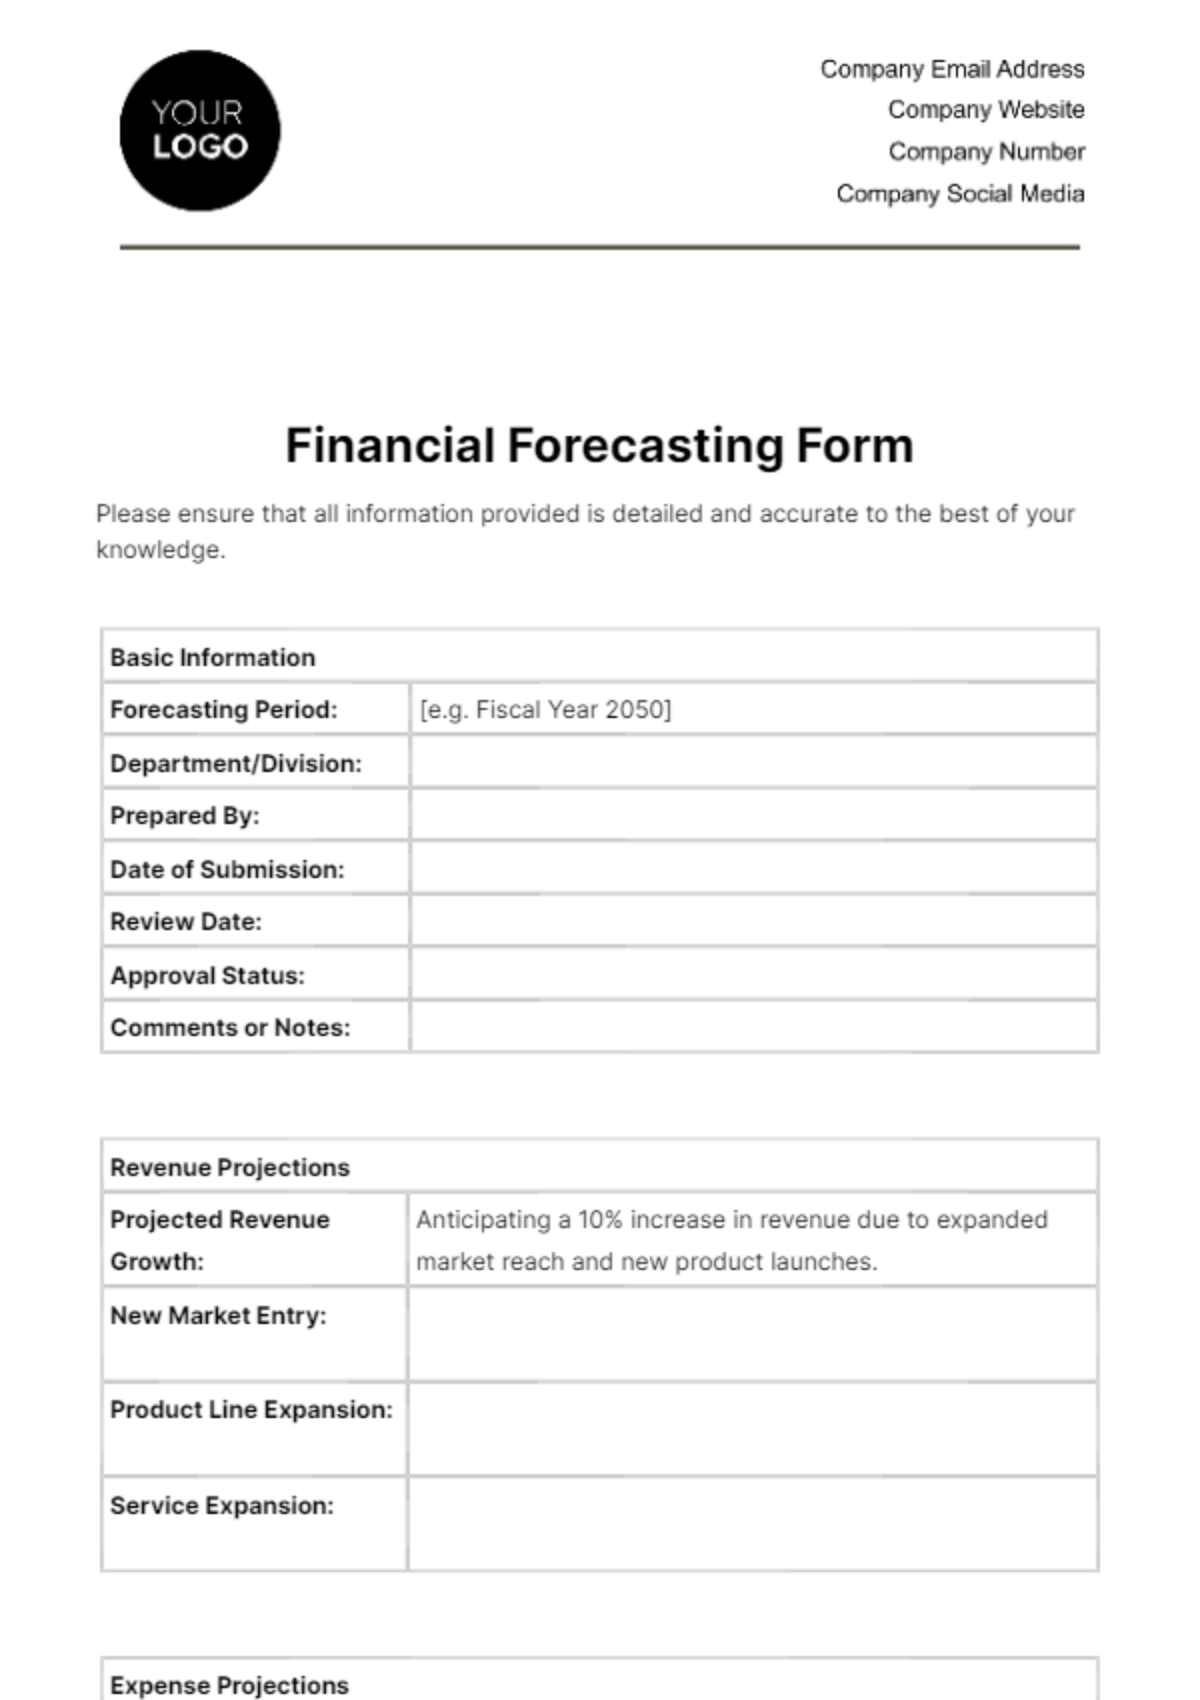 Free Financial Forecasting Form Template